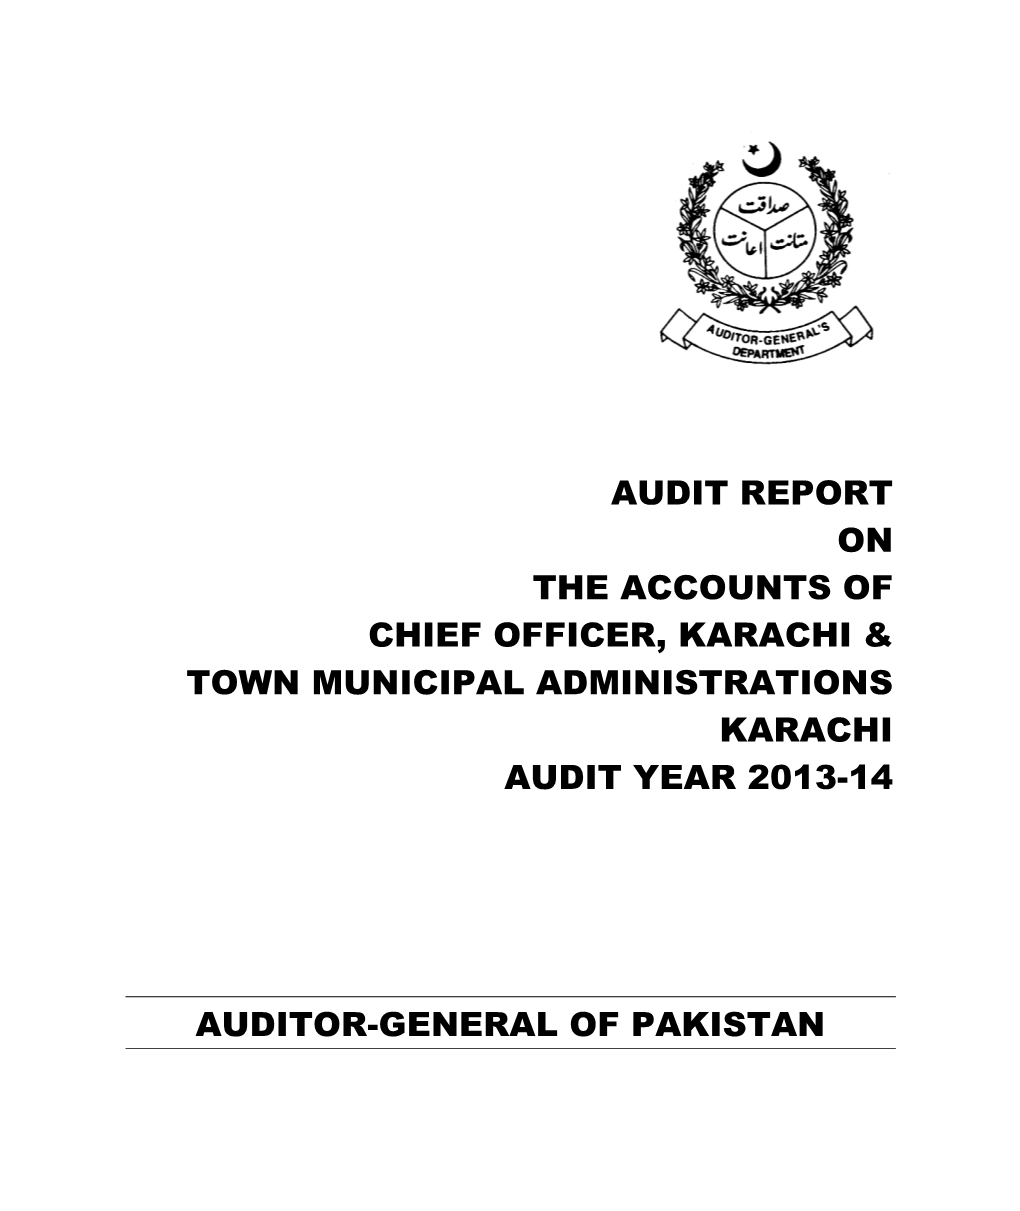 Audit Report on the Accounts of Chief Officer, Karachi & Town Municipal Administrations Karachi Audit Year 2013-14